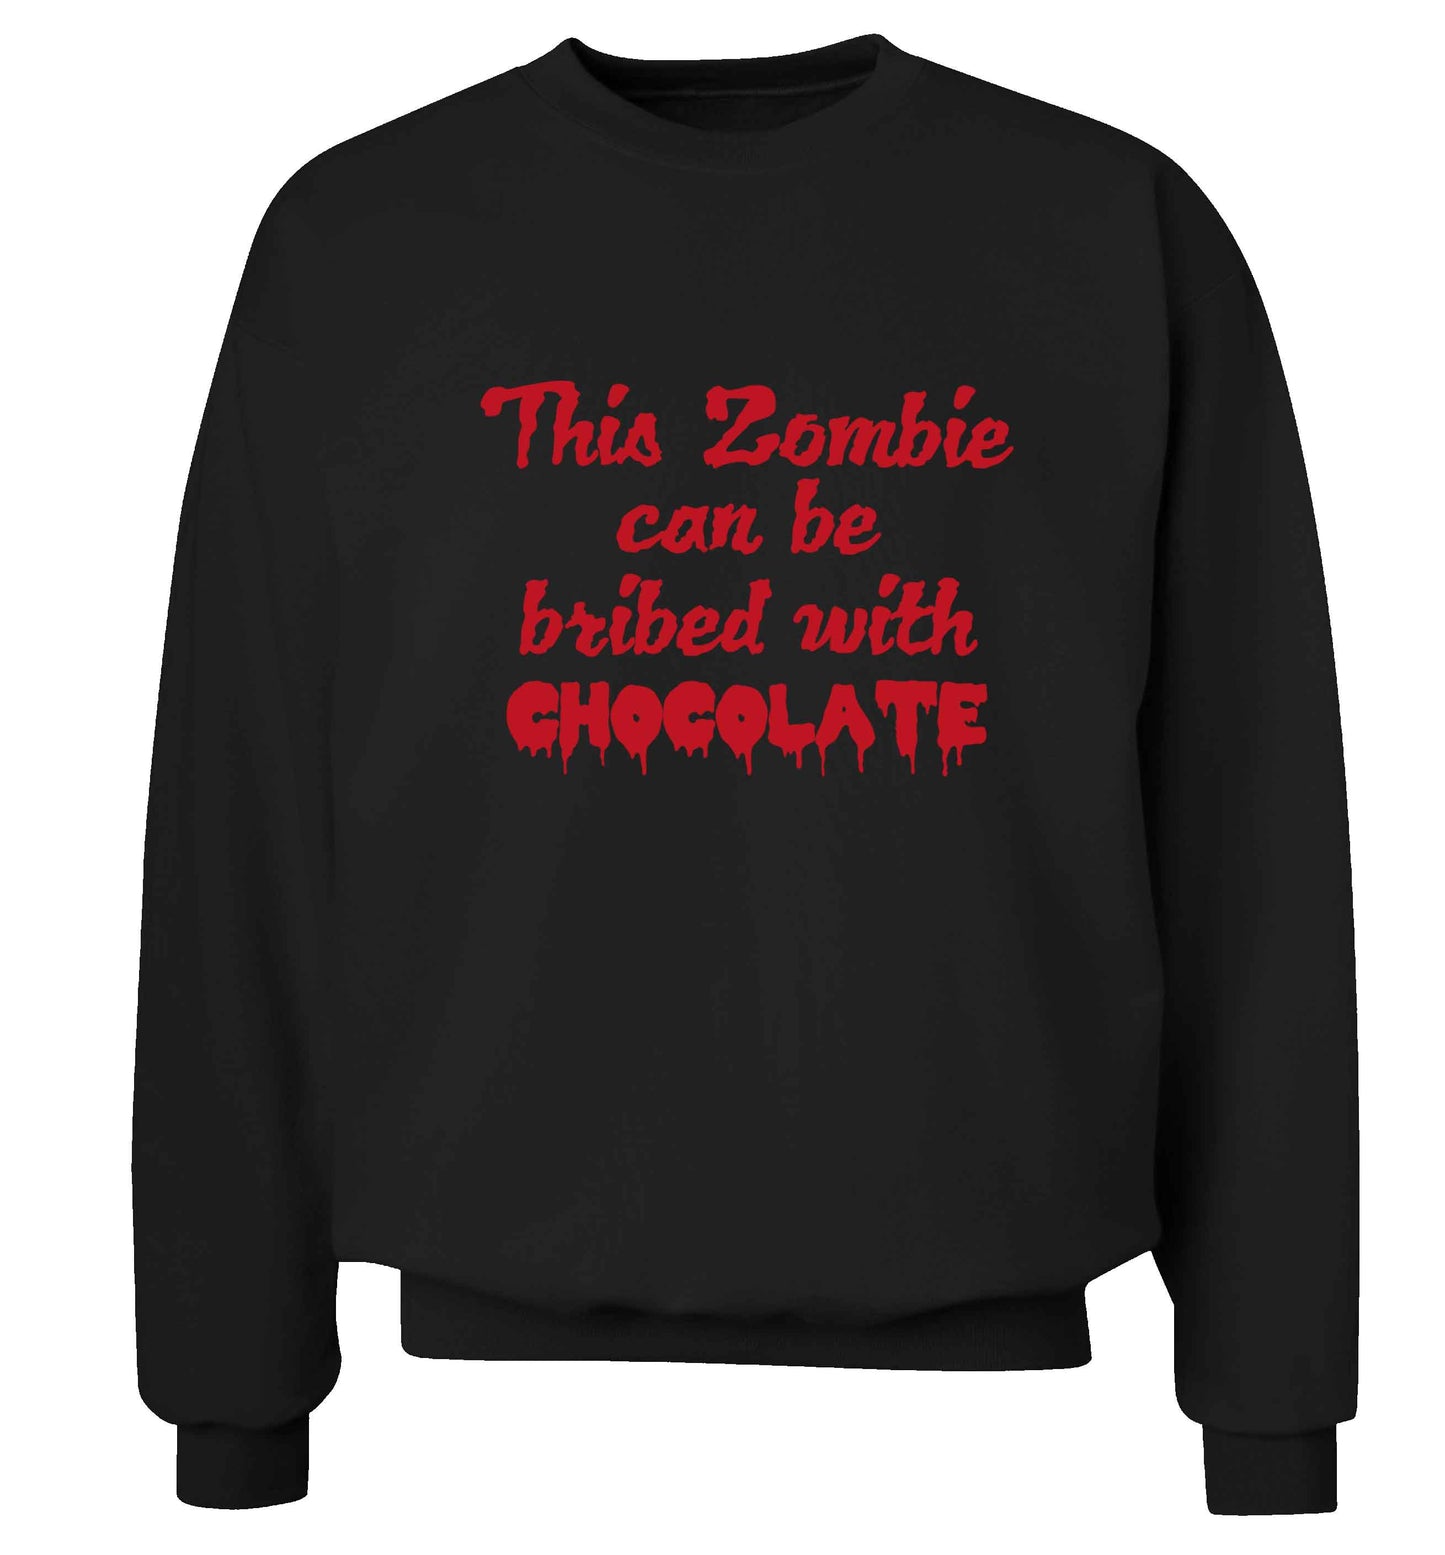 This zombie can be bribed with chocolate adult's unisex black sweater 2XL